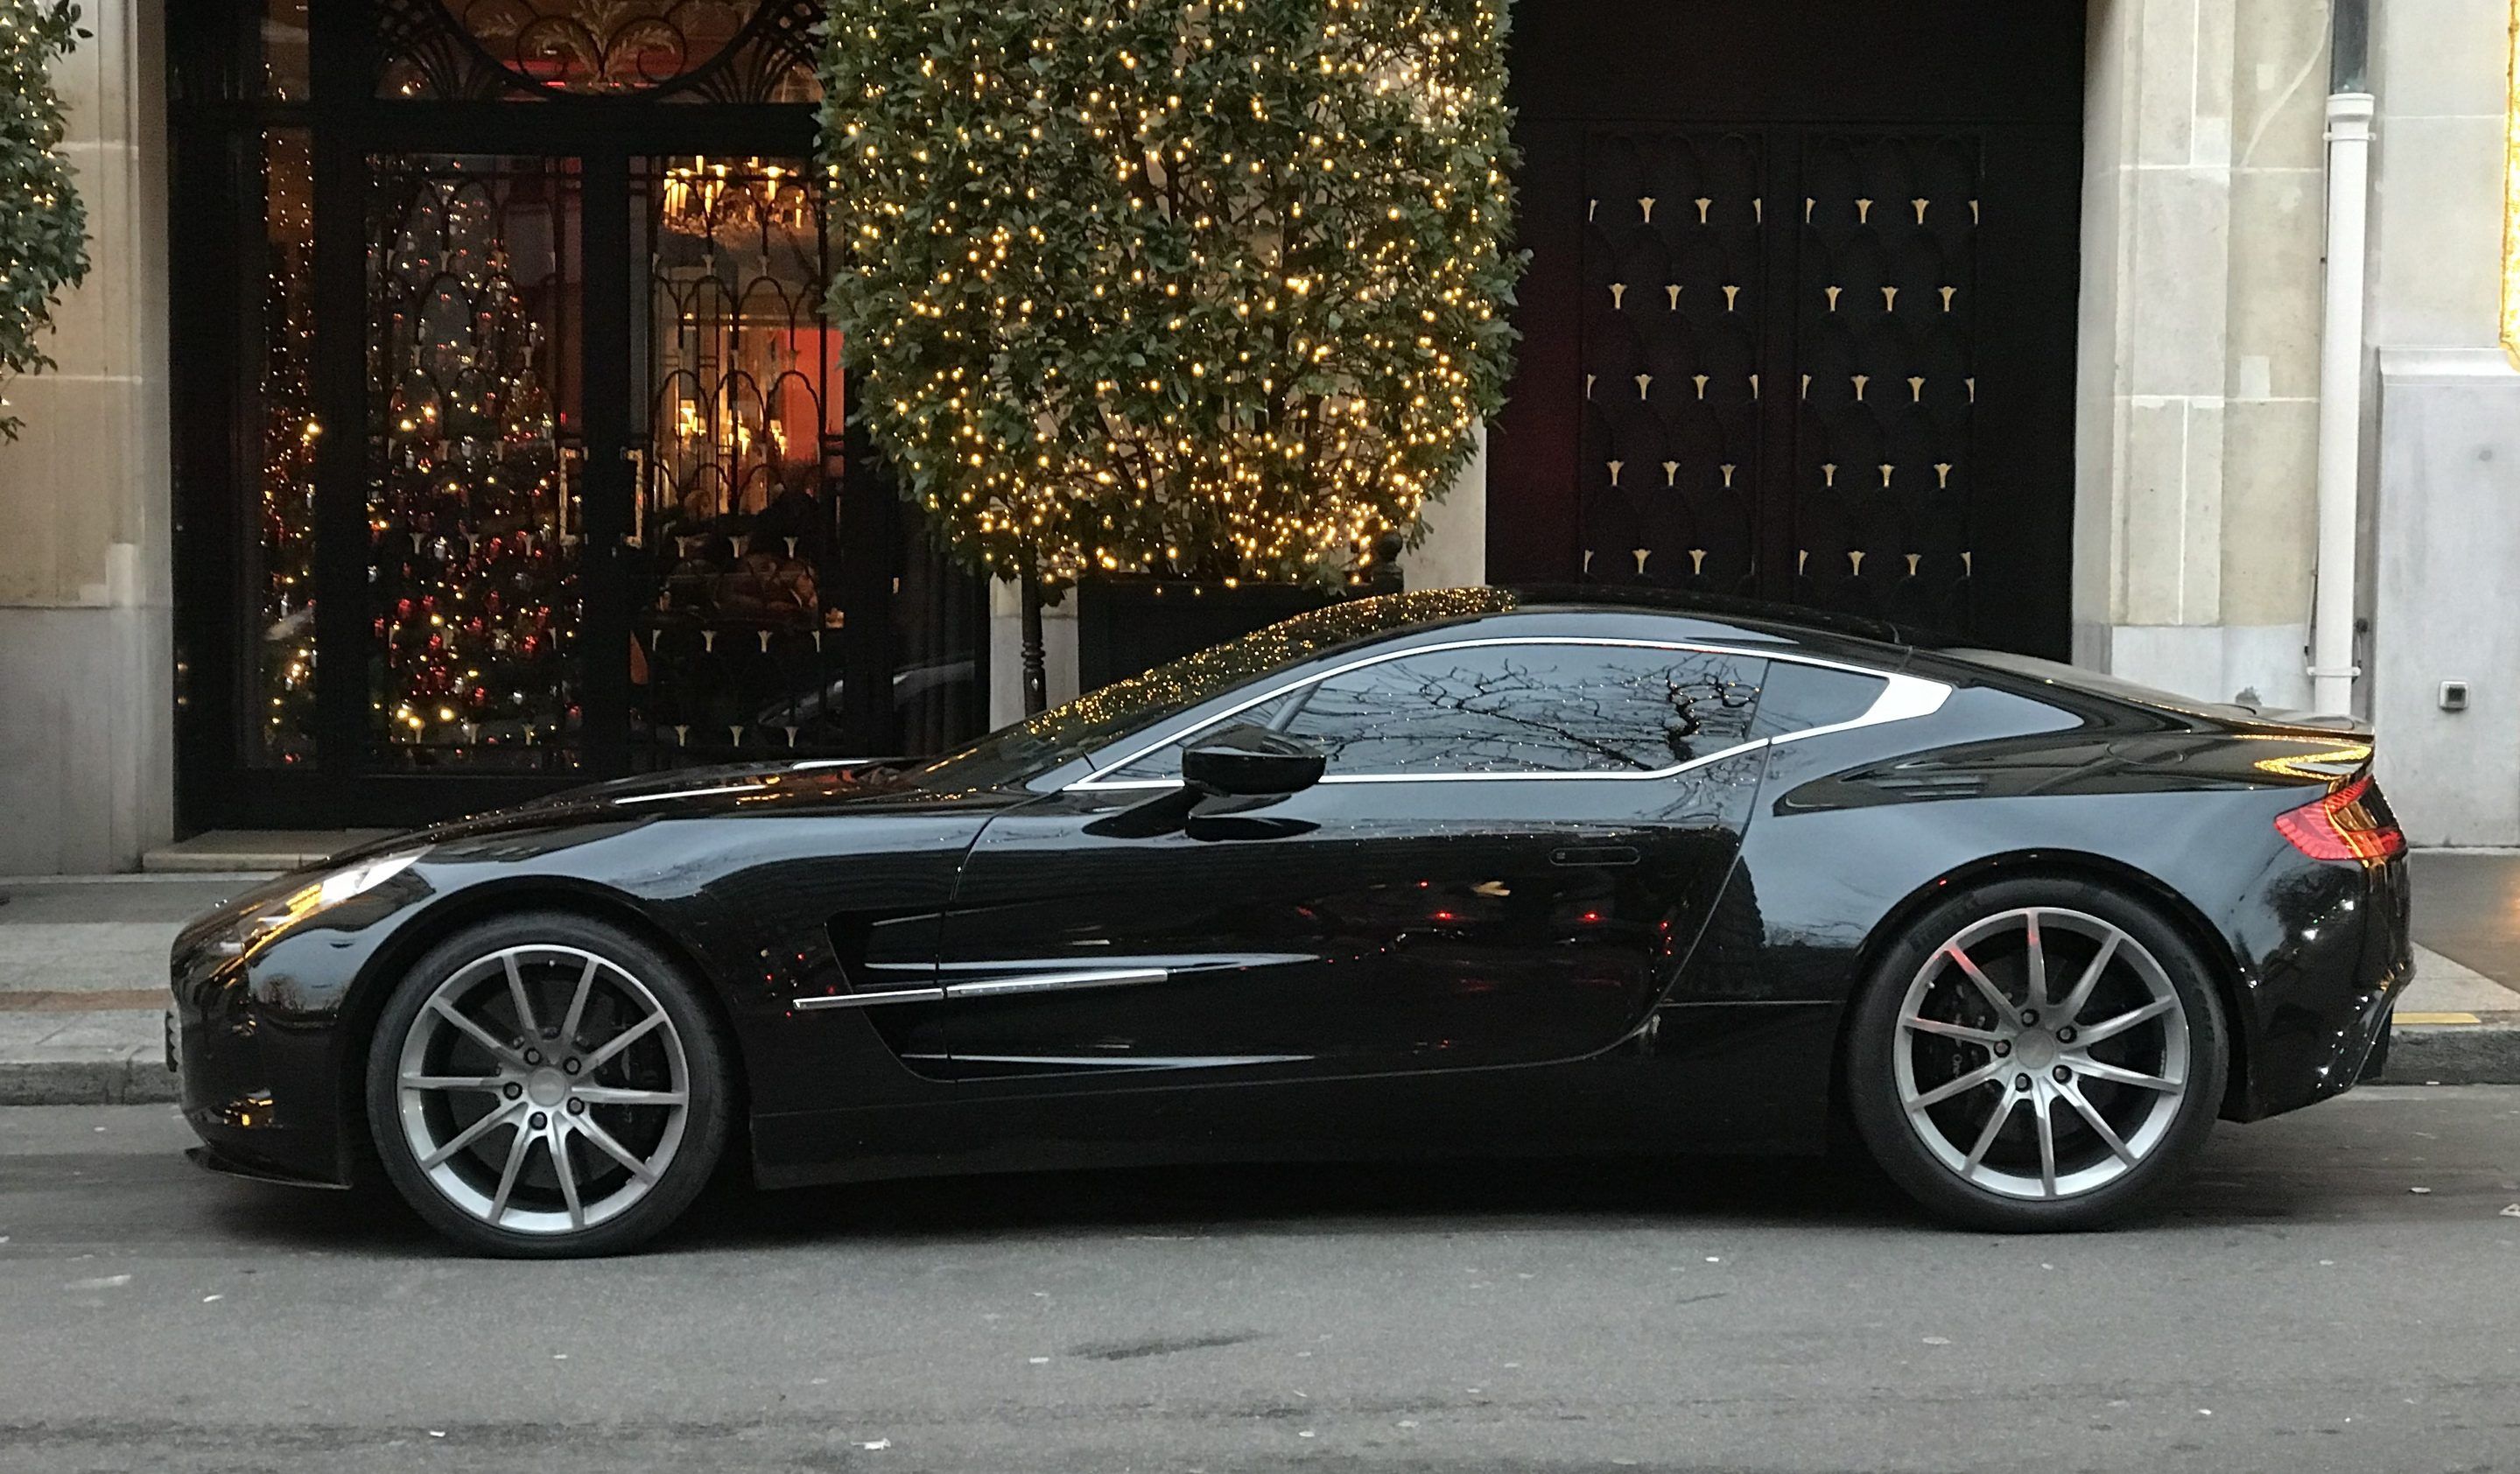 Aston Martin One 77 Parked Outside